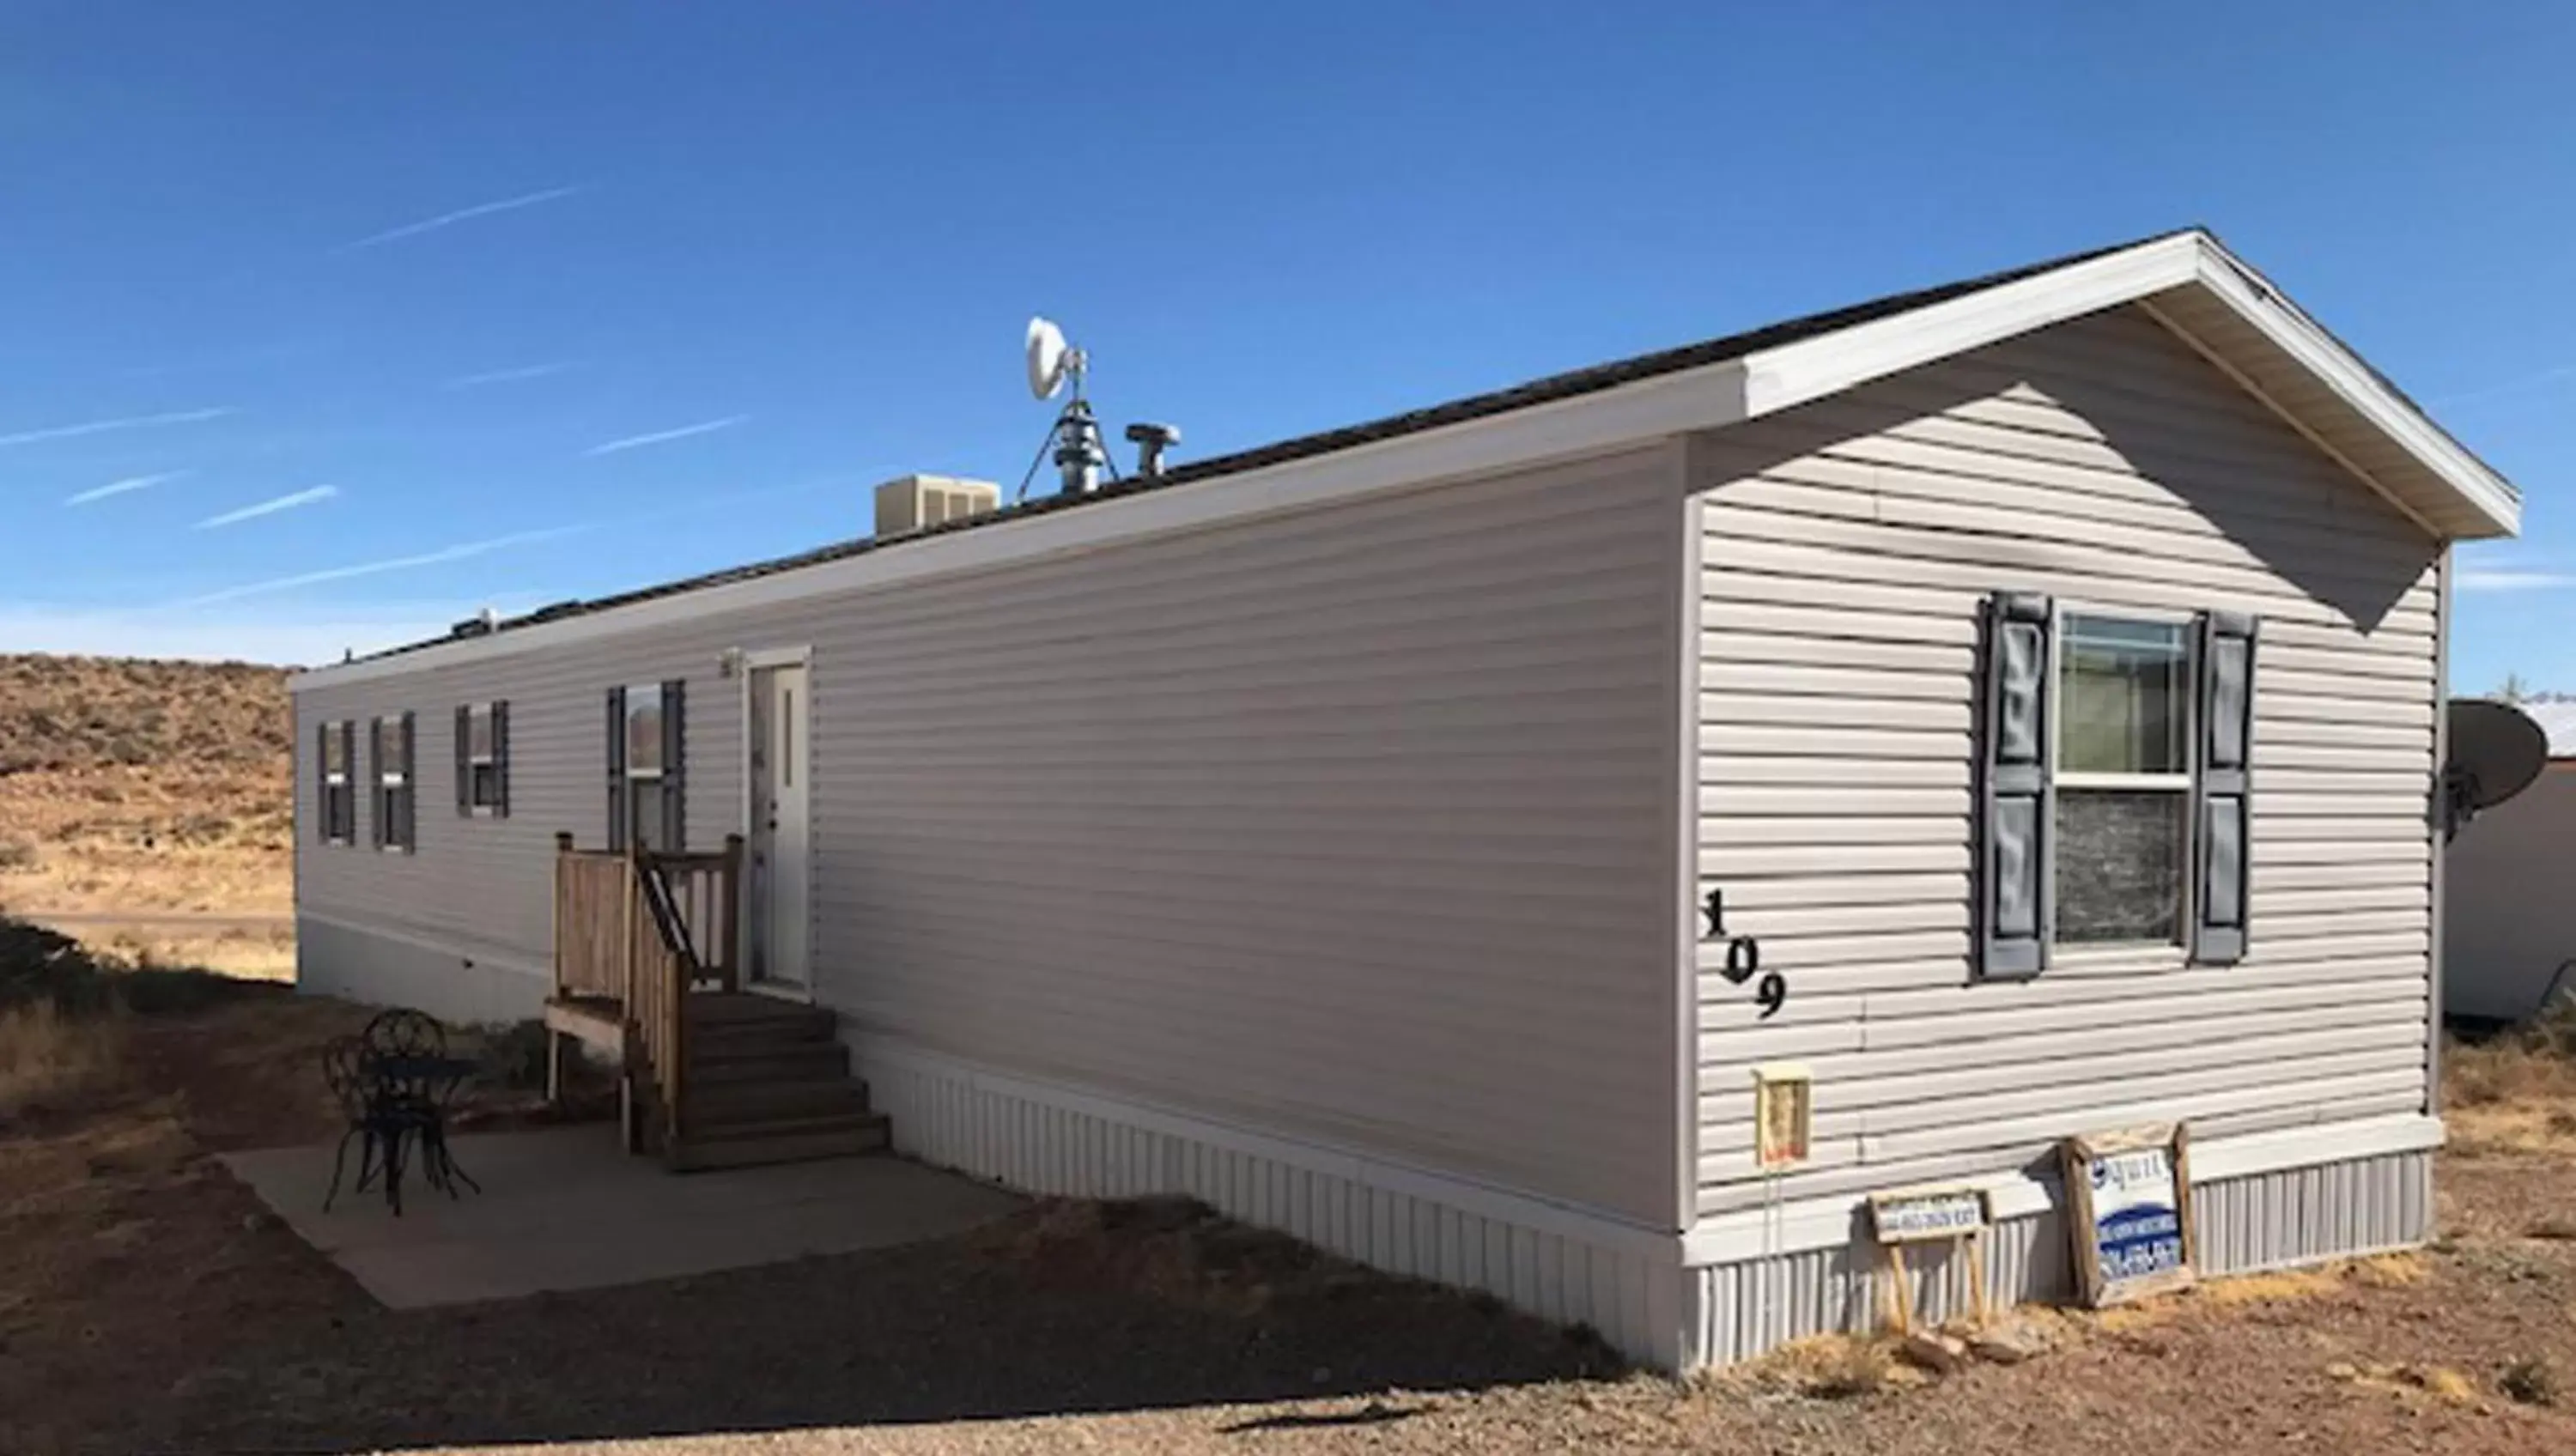 Property Building in Ticaboo Lodge Lake Powell